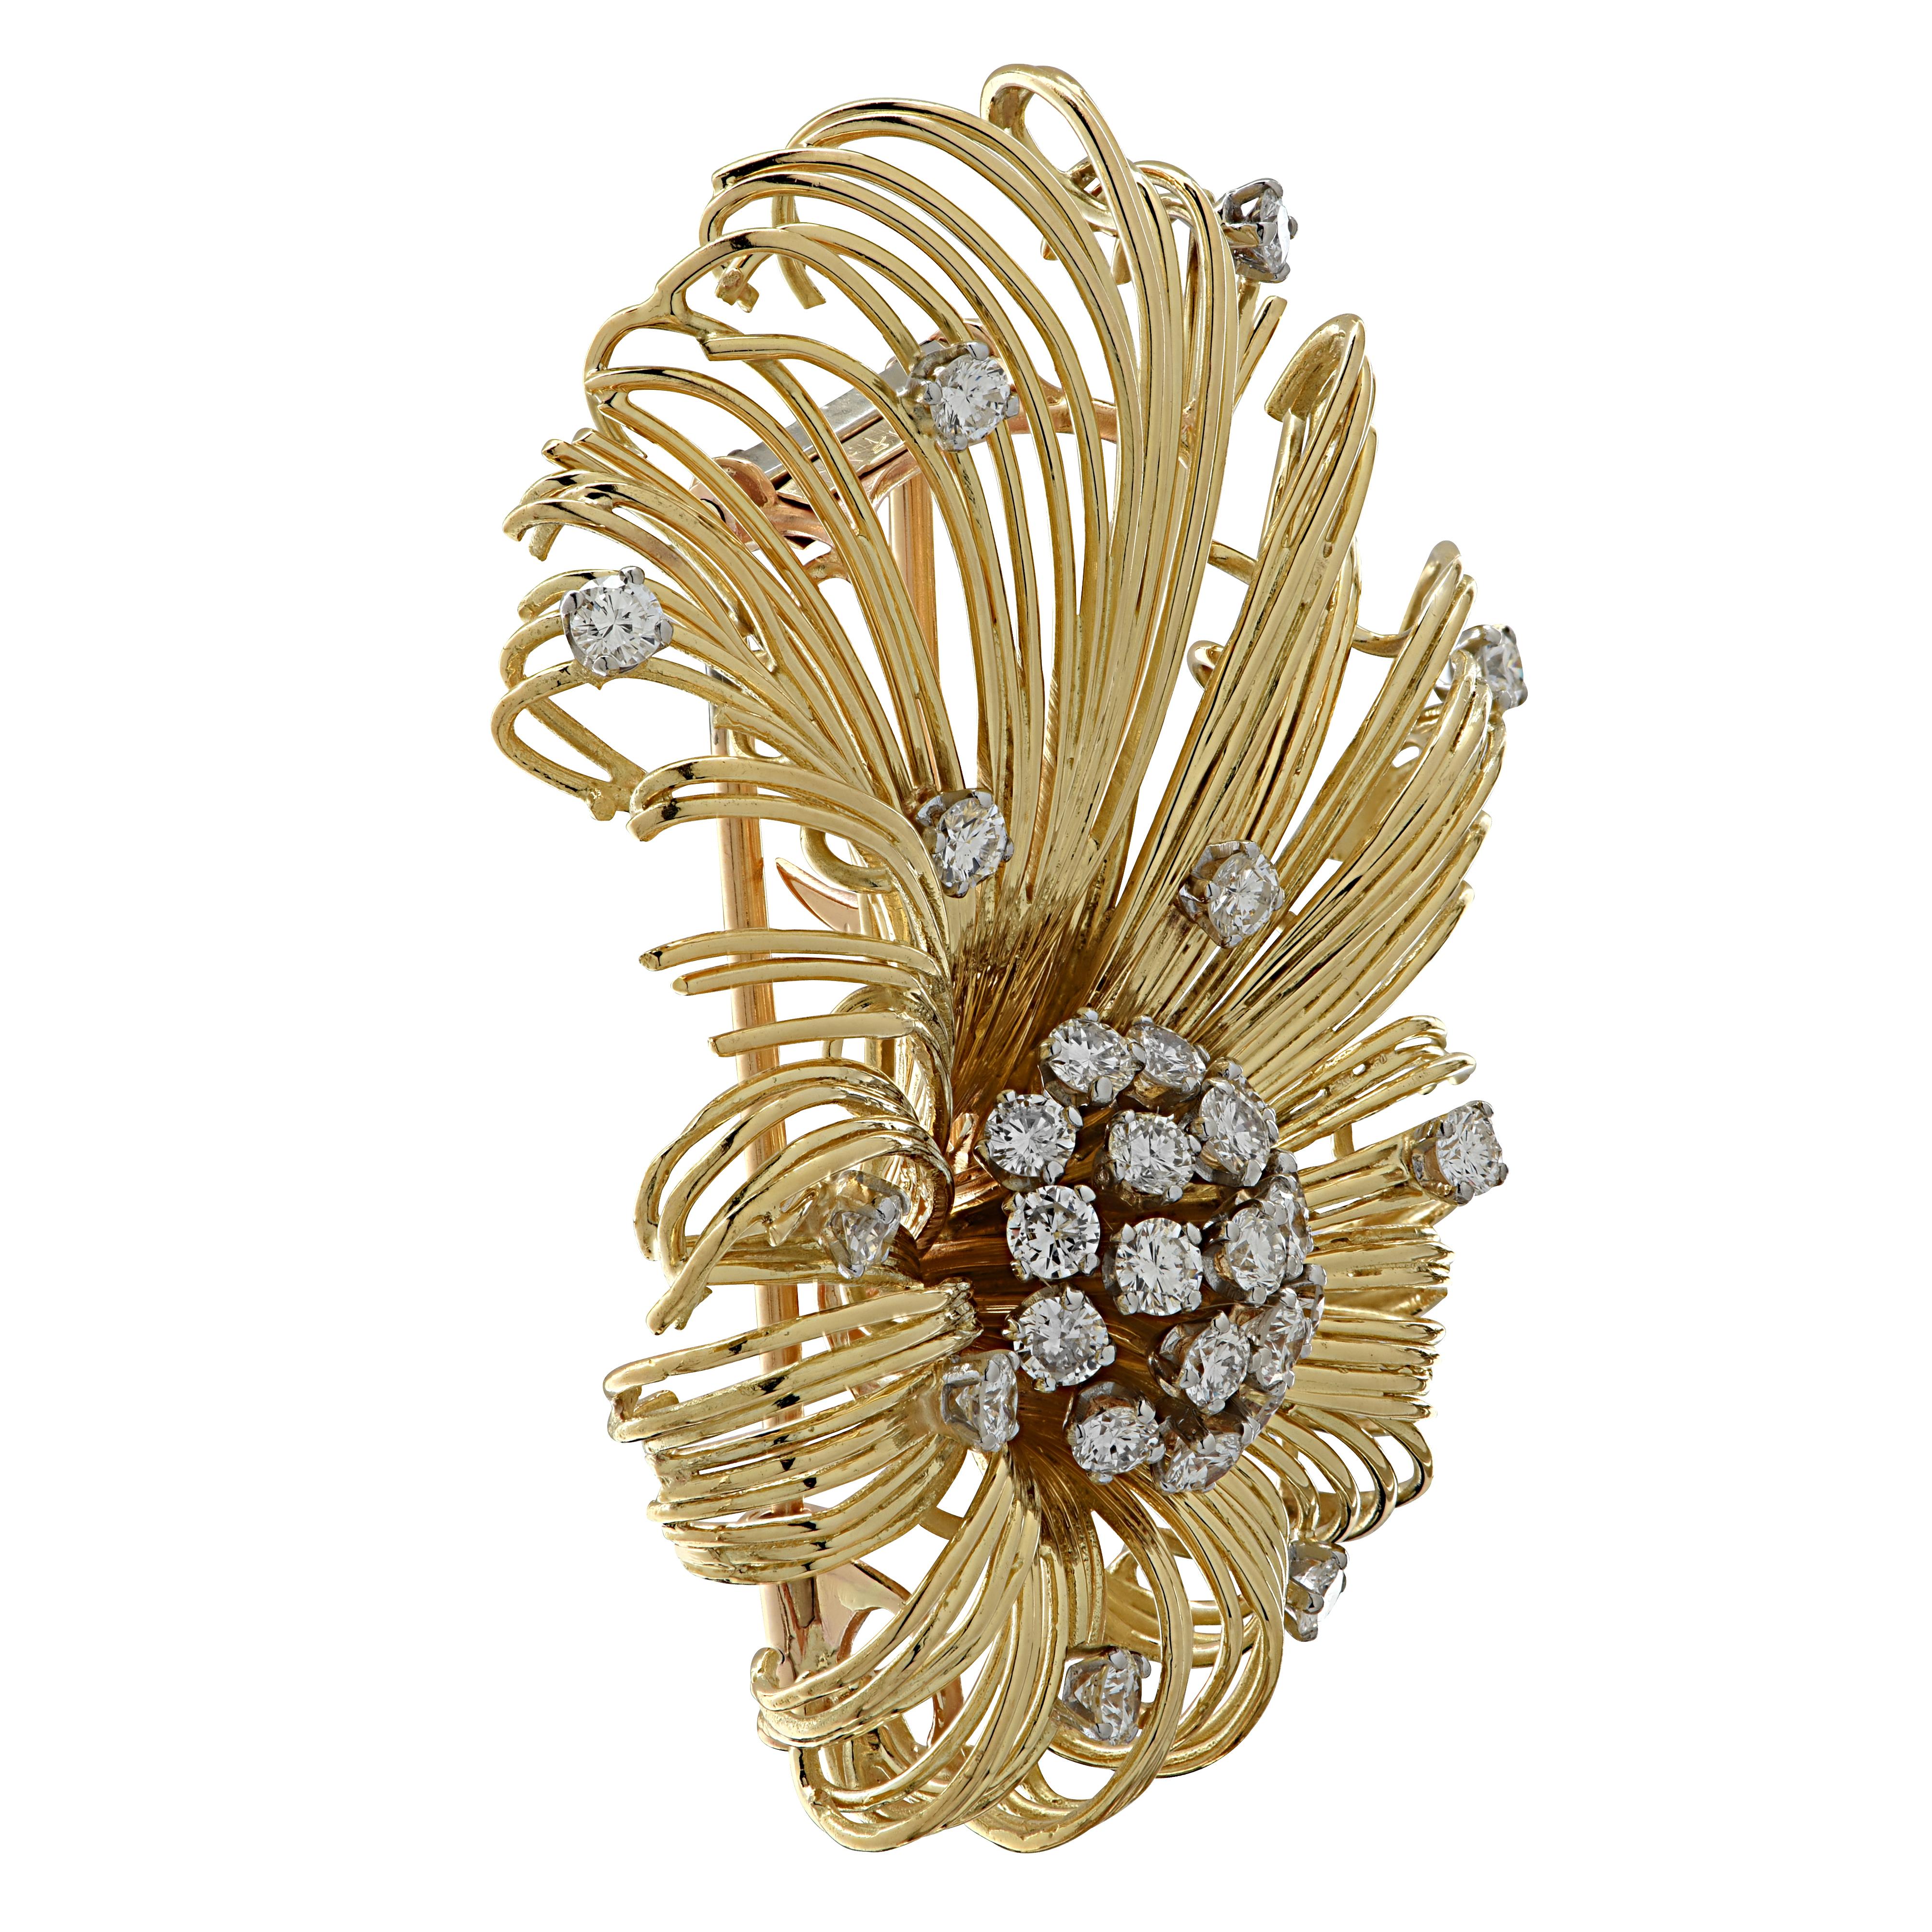 Striking Tiffany and Co. brooch pin, finely crafted in 18 karat yellow gold featuring 29 round brilliant cut diamonds weighing 2.5 carats total, F color VVS-VS clarity. Delicate wisps of gold, sprinkled with diamonds, radiate from the center diamond